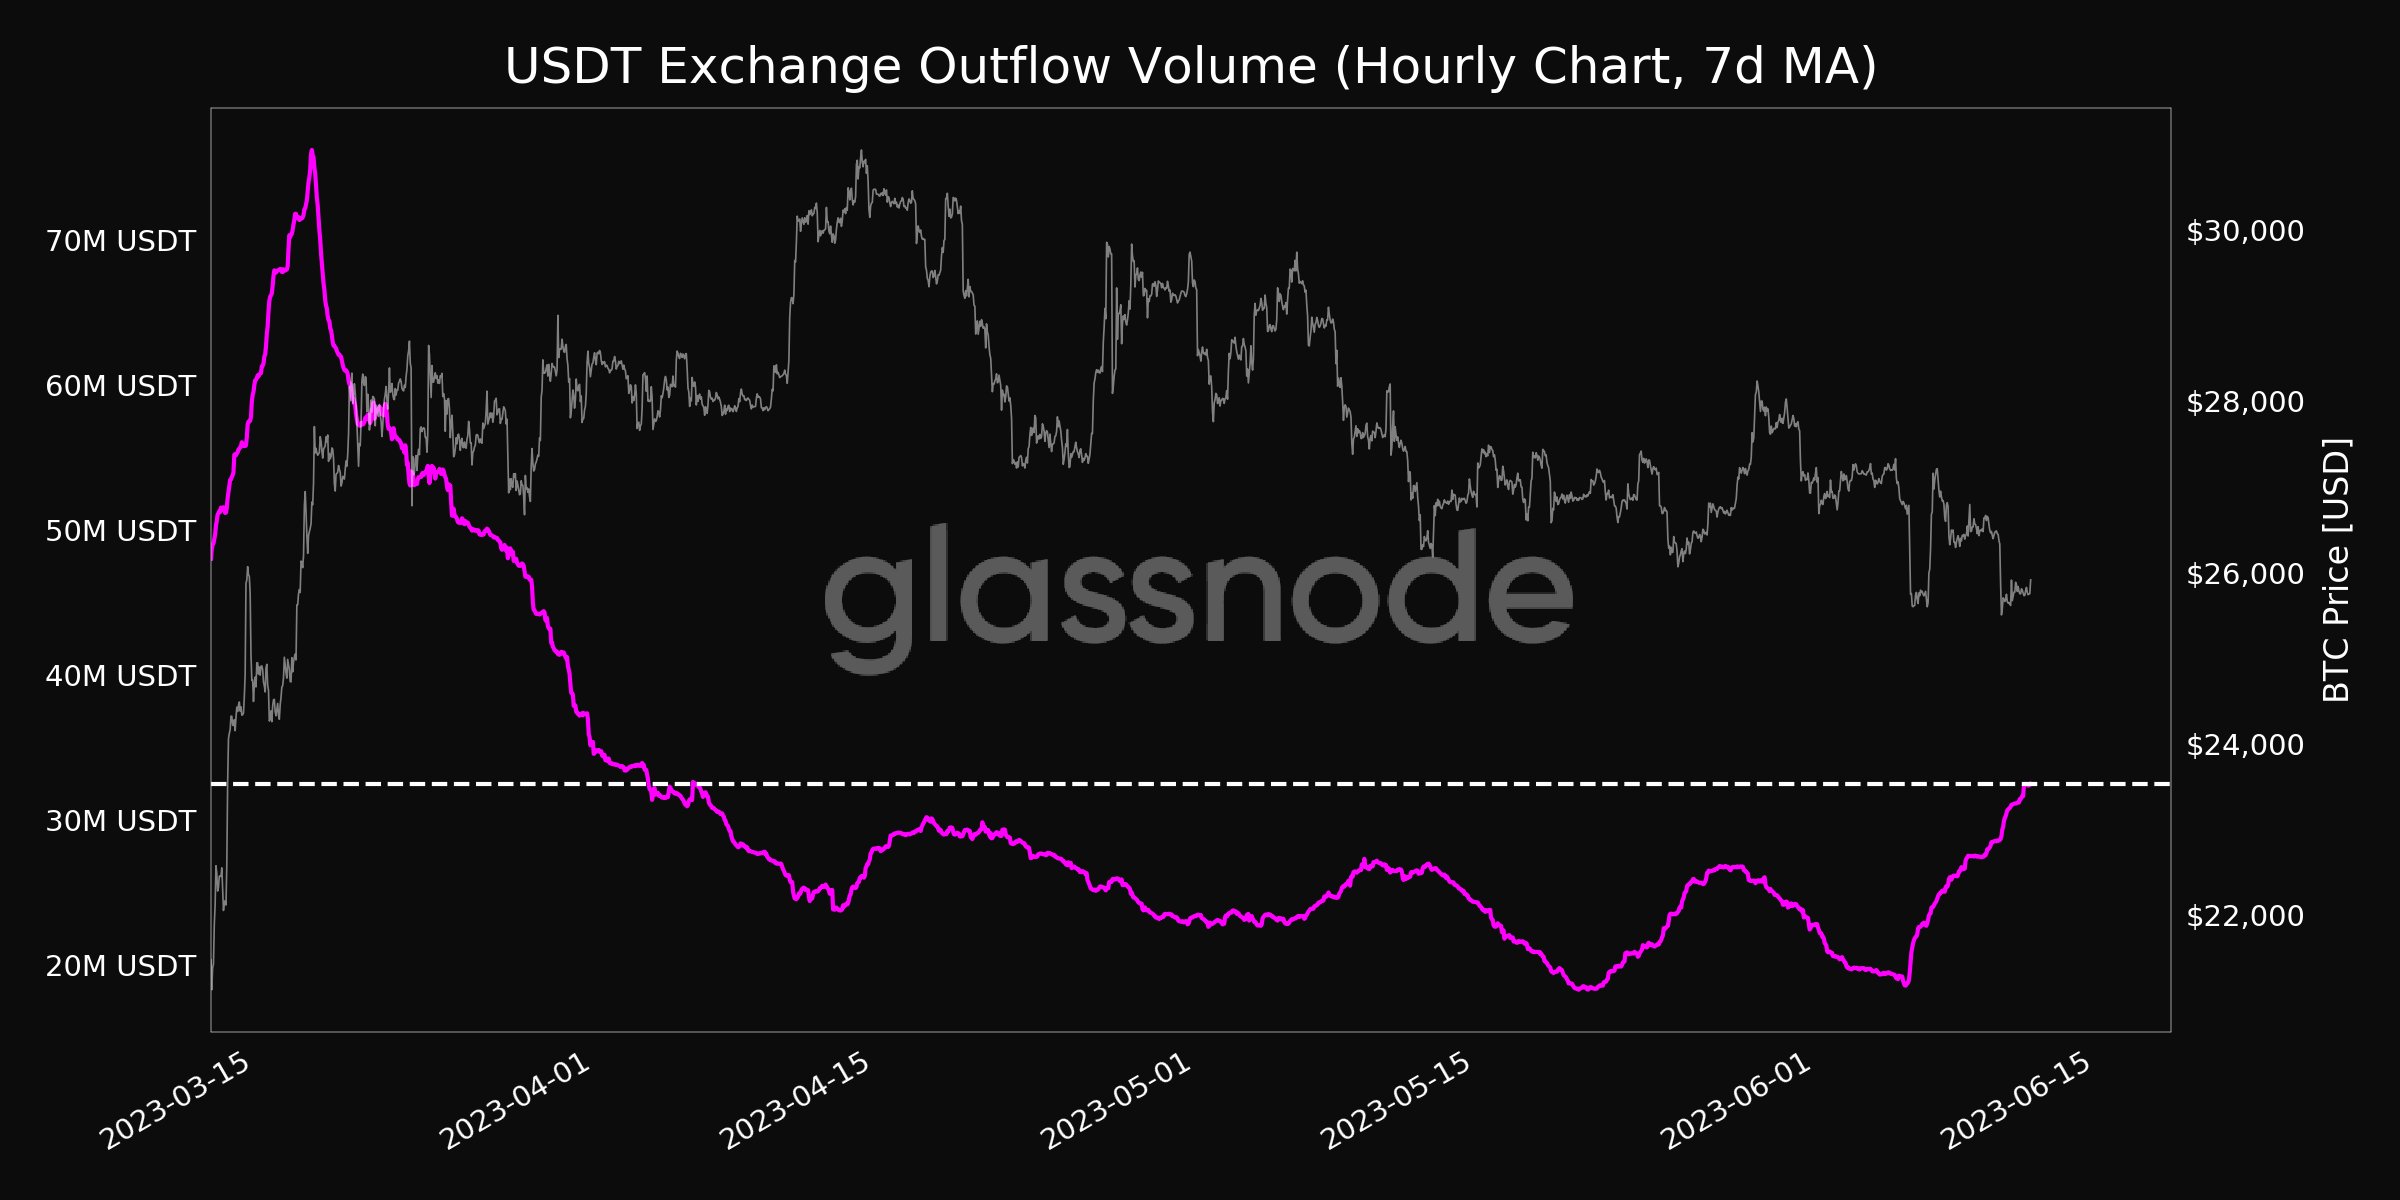 USDT exchange outflow volume chart from Glassnode